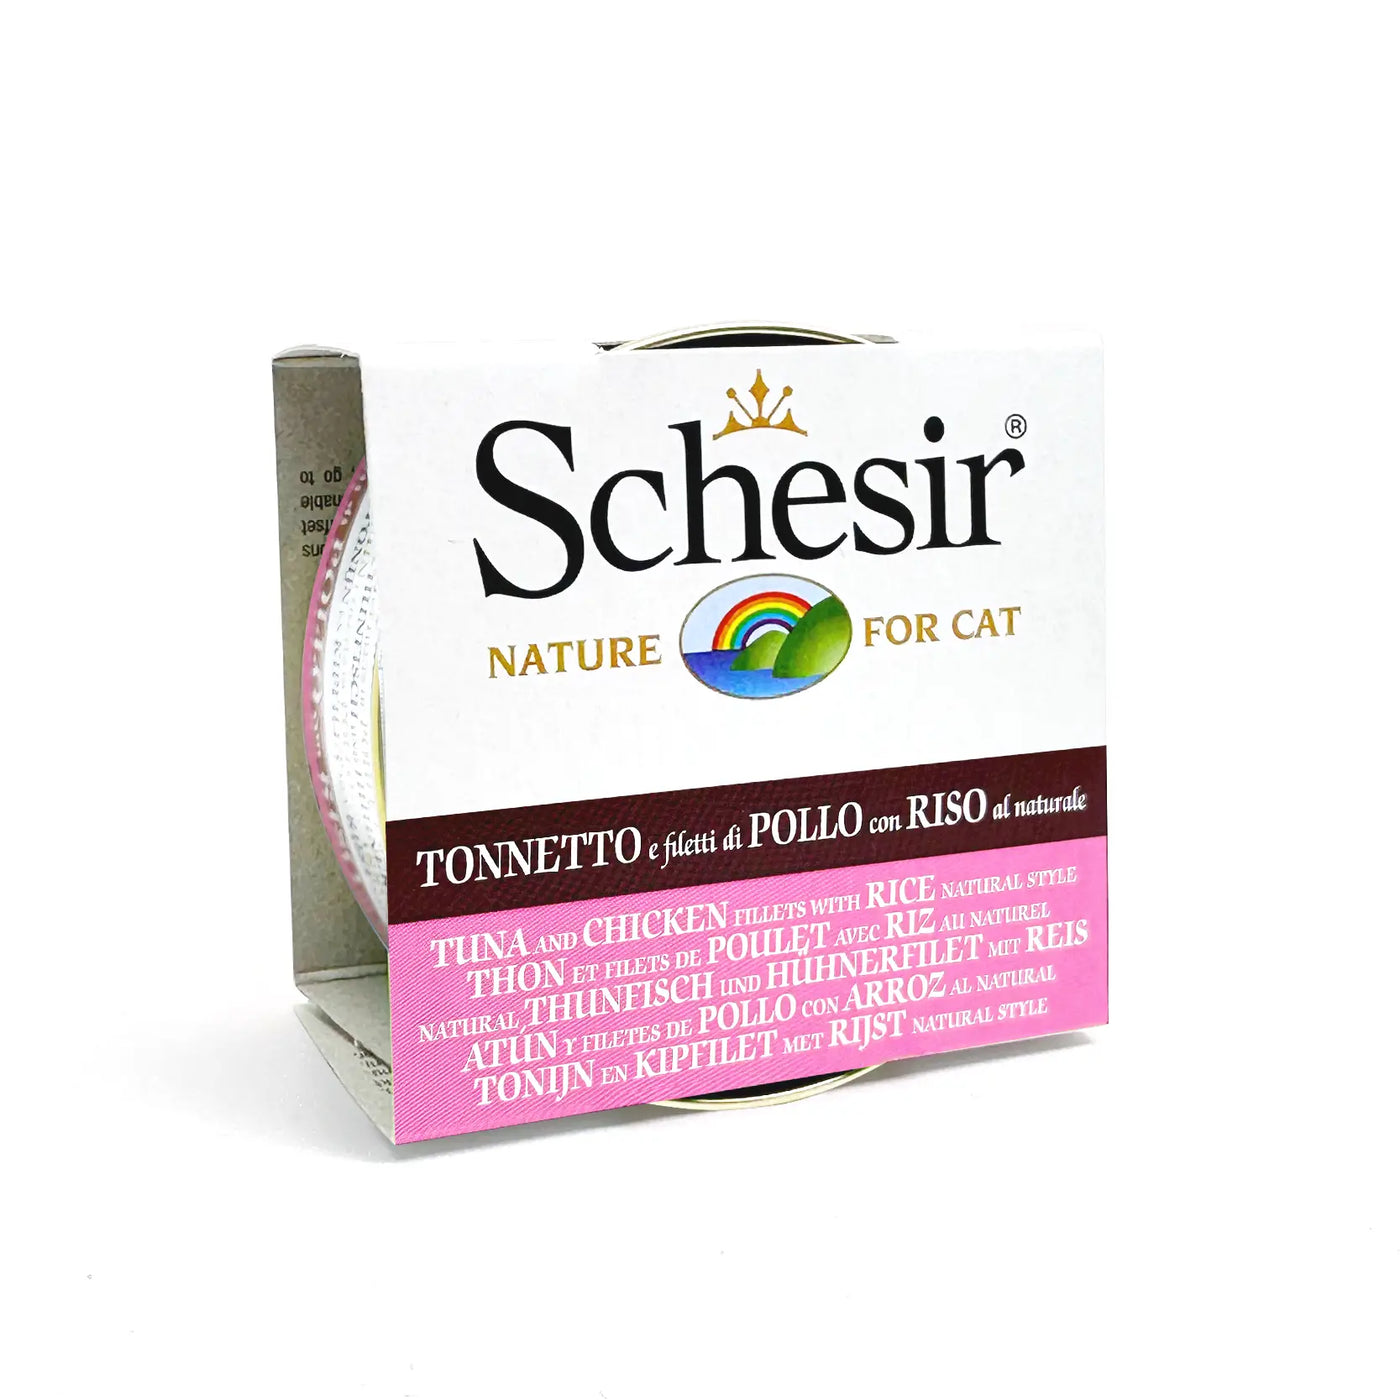 Schesir - Complementary Wet Food For Adult Cats - Tuna And Chicken Fillet With Rice Natural Style 85g